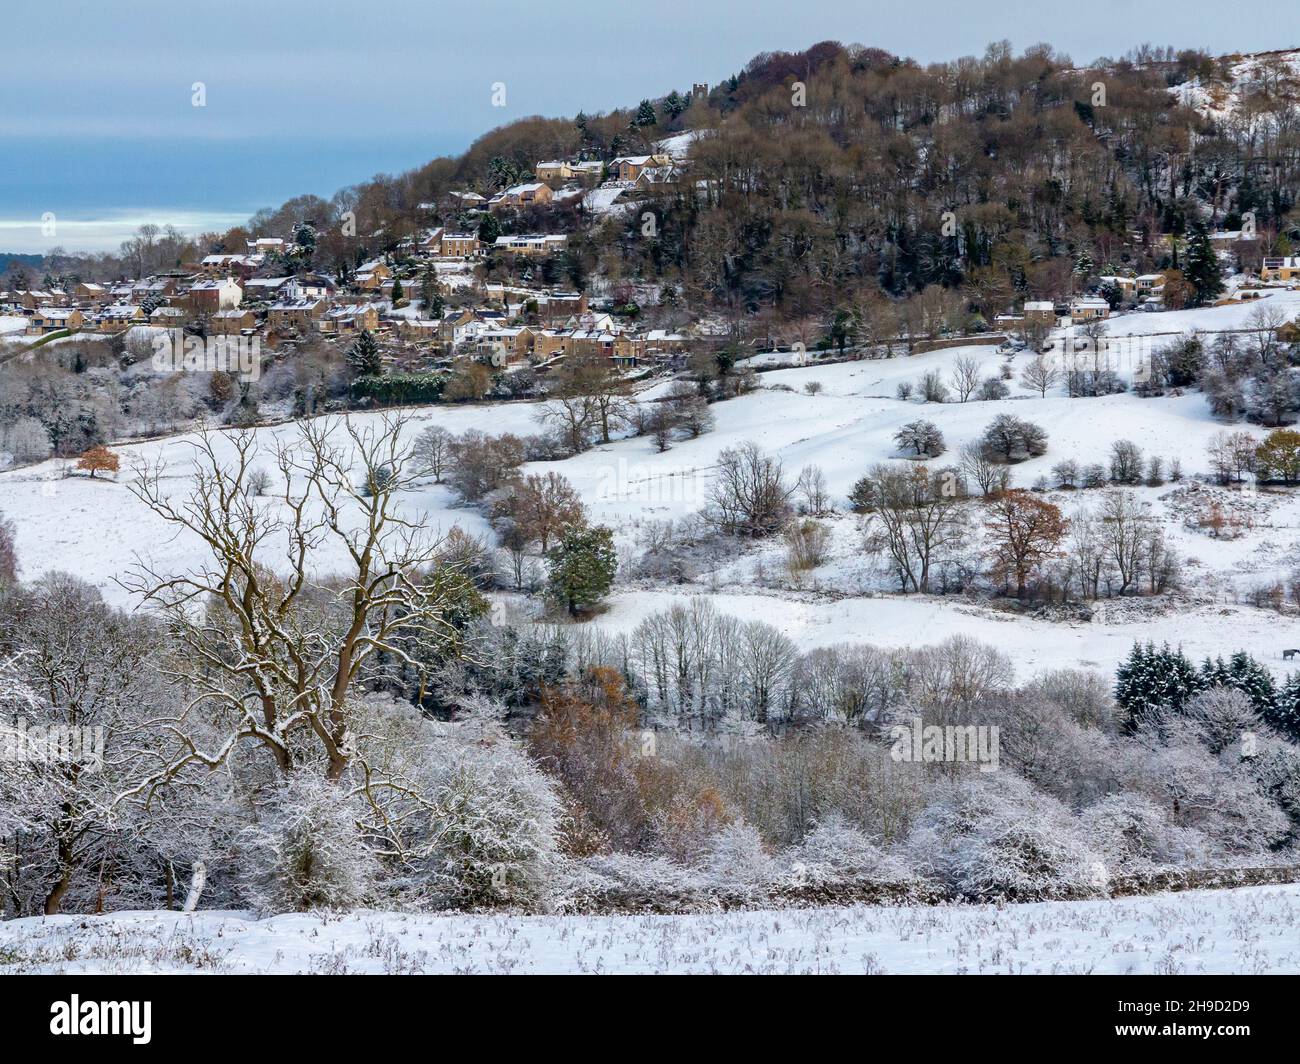 Snow covered landscape with trees at Matlock Bath in the Derbyshire Peak District England UK with Starkholmes village visible in the distance. Stock Photo